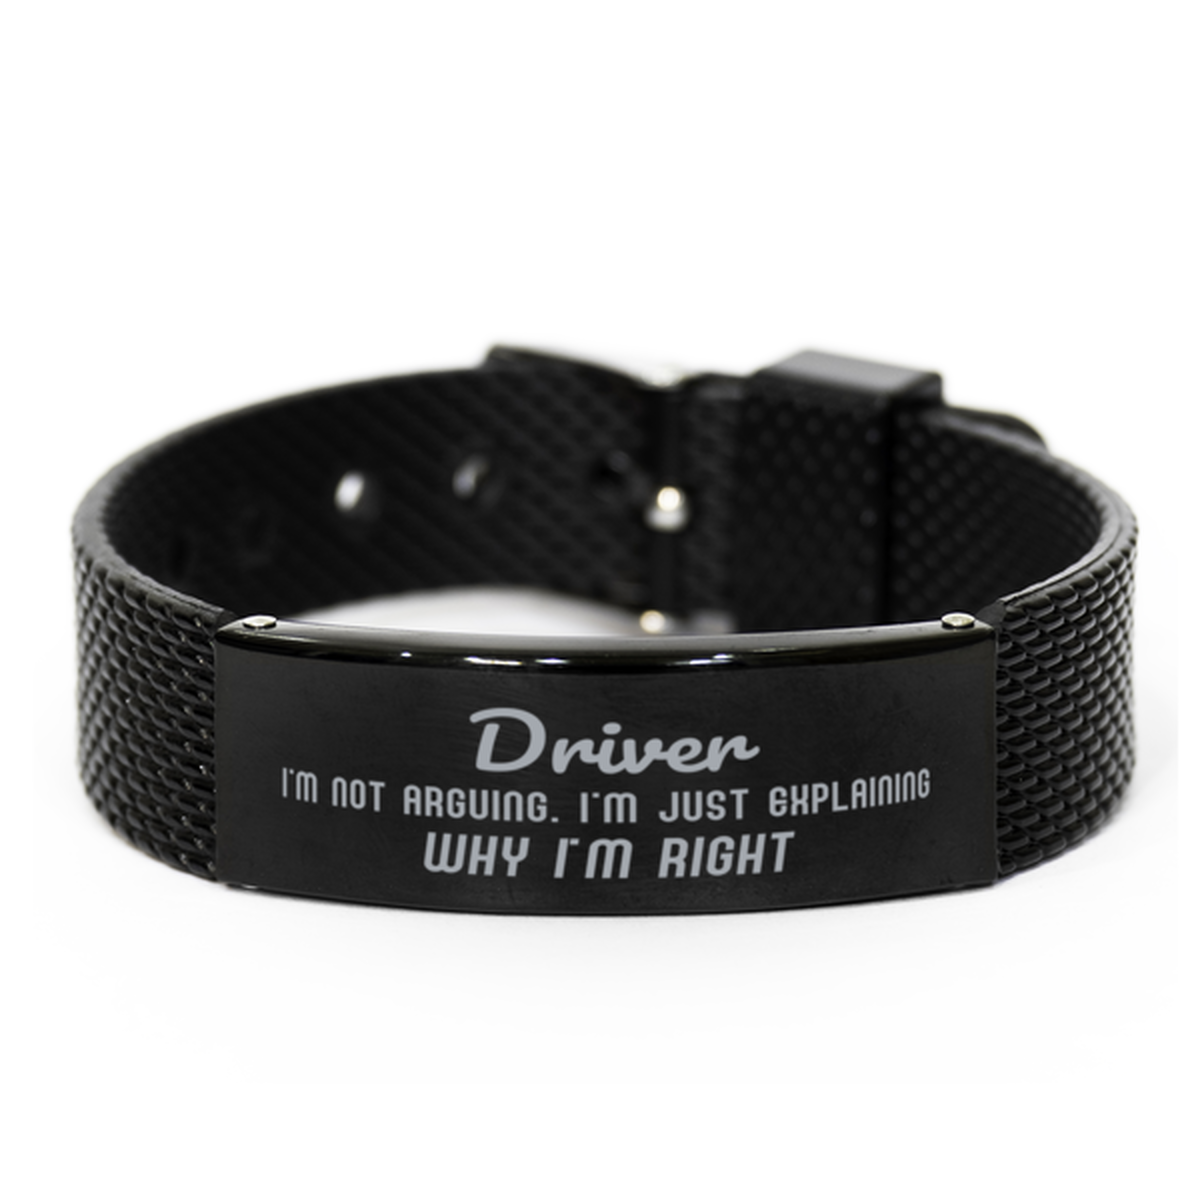 Driver I'm not Arguing. I'm Just Explaining Why I'm RIGHT Black Shark Mesh Bracelet, Funny Saying Quote Driver Gifts For Driver Graduation Birthday Christmas Gifts for Men Women Coworker